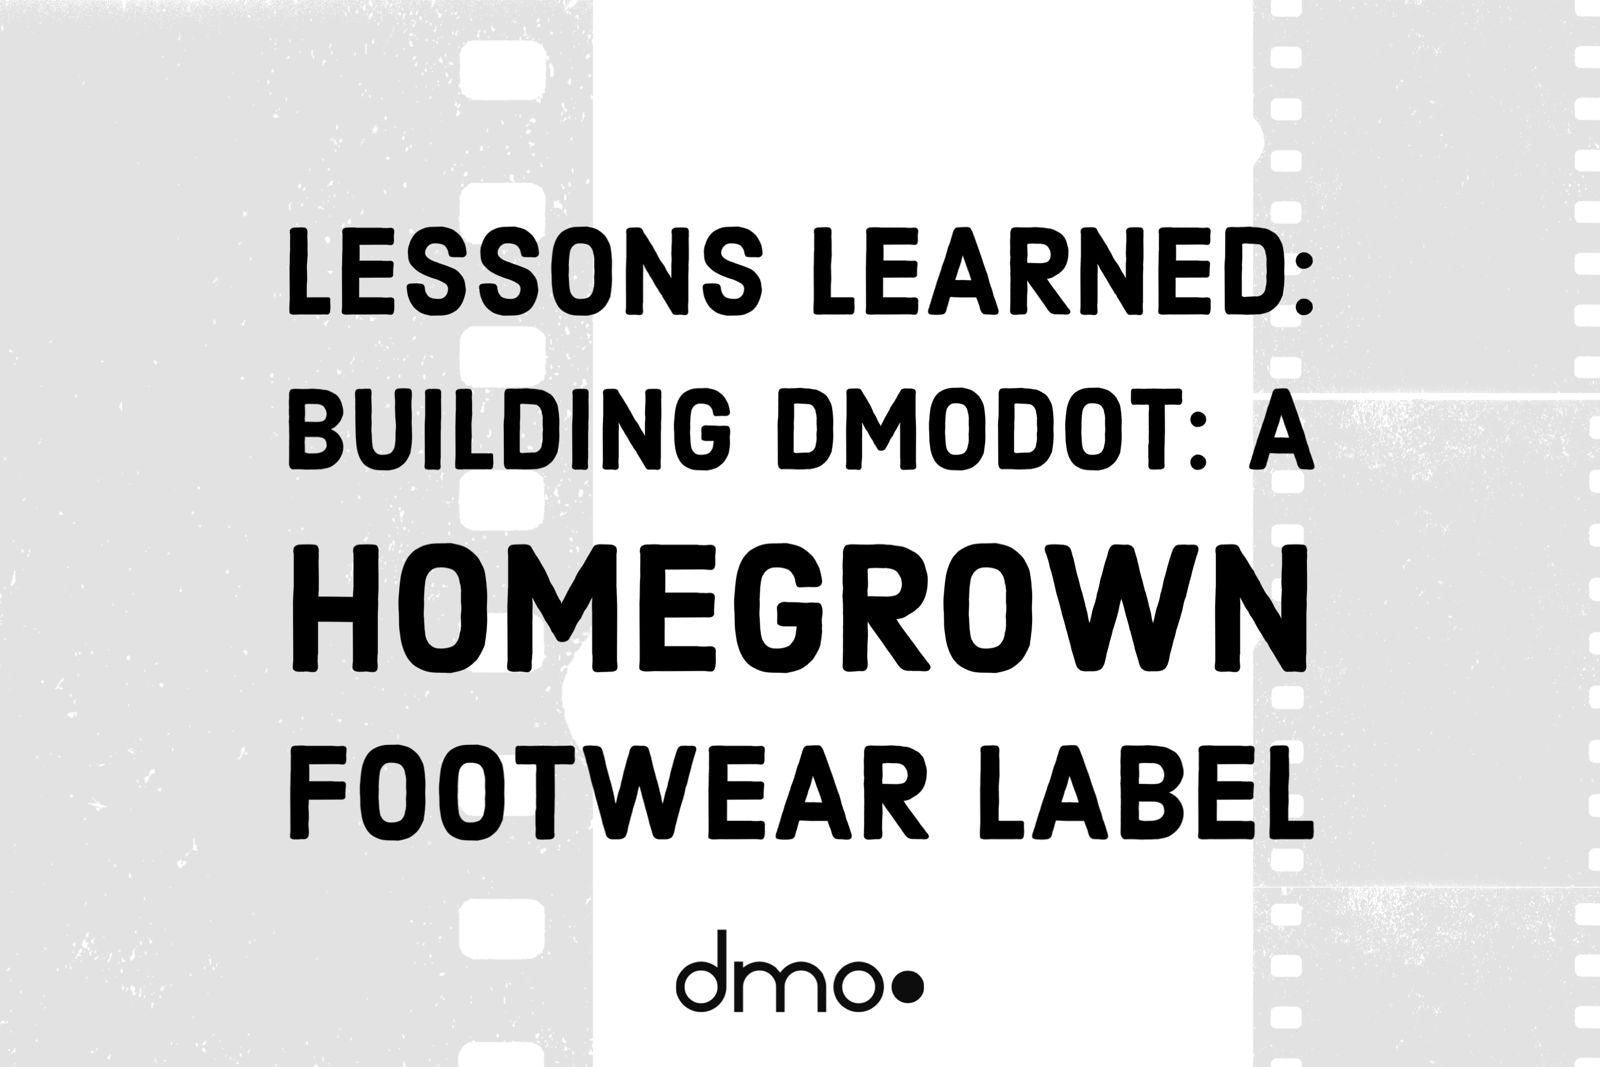 Lessons Learned: Building dmodot: A homegrown footwear label - dmodot Shoes